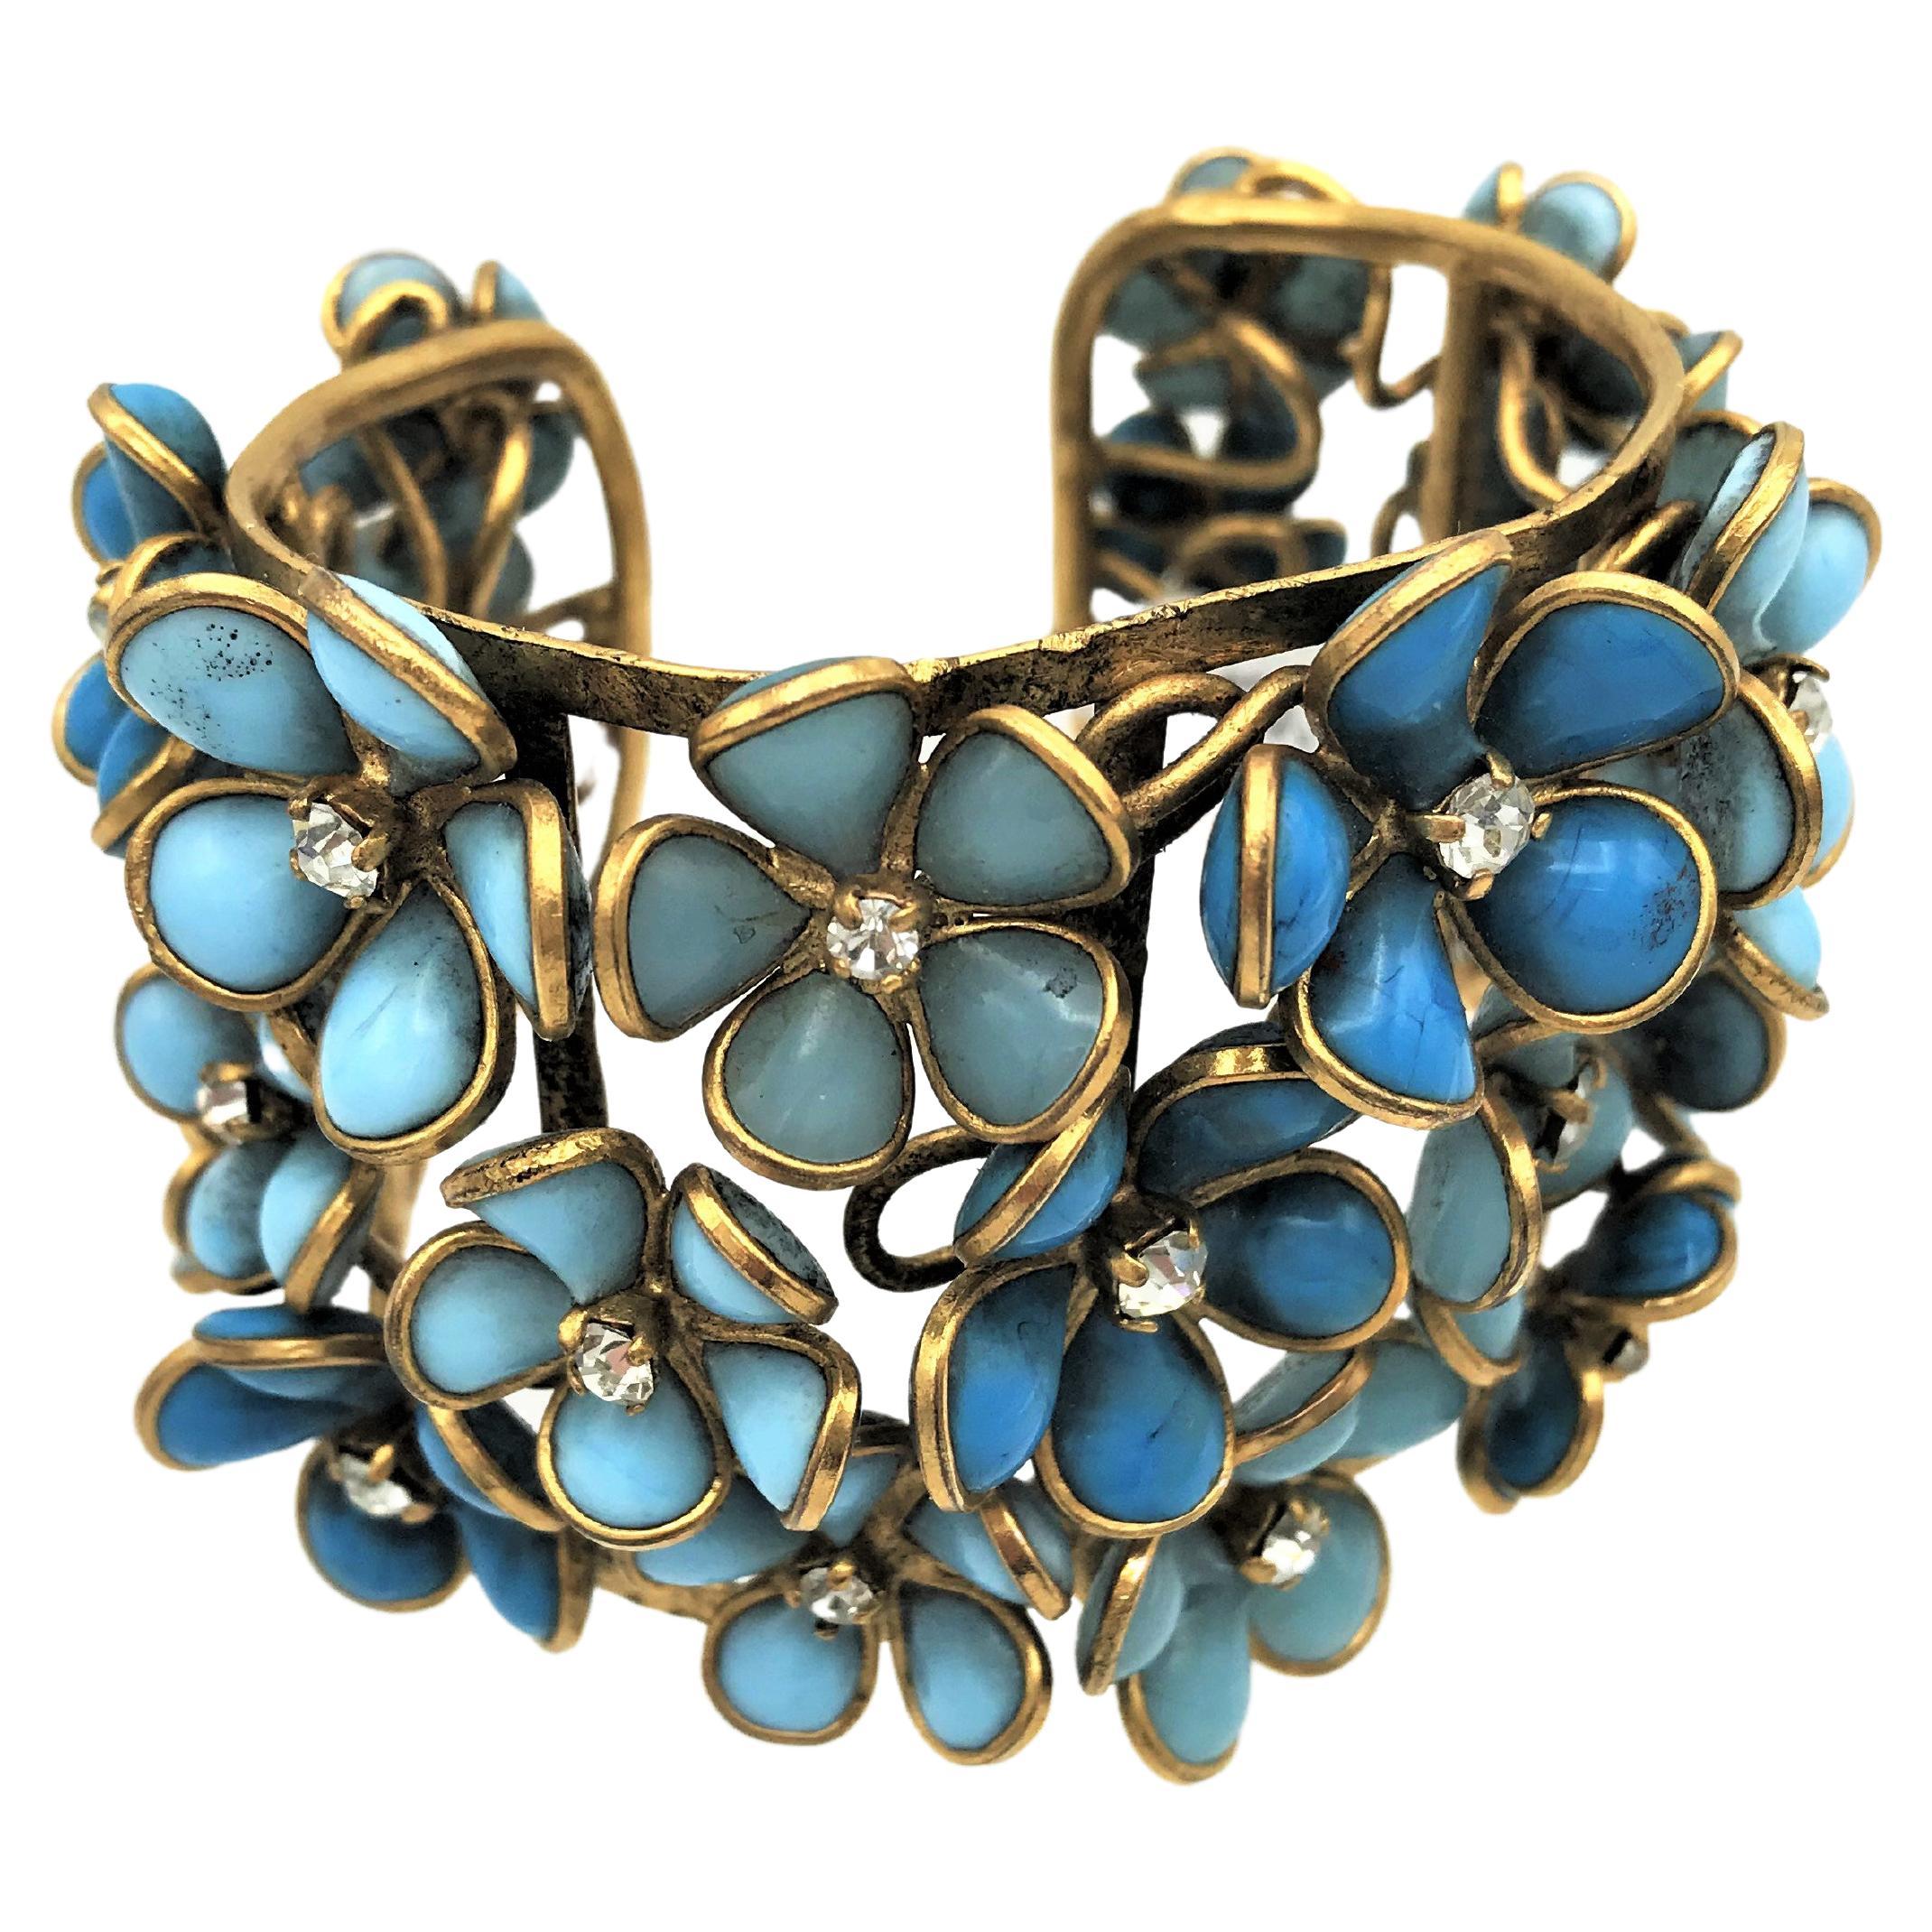 Beautiful cuff consisting of many individual blue glass flowers in the style of Chanel. 
this beautiful cuff ist unsigned  and probable made by Gripoix employees.
It is a great look with wearing with Jeans and white blouse. 

Measurement: Height 5.5